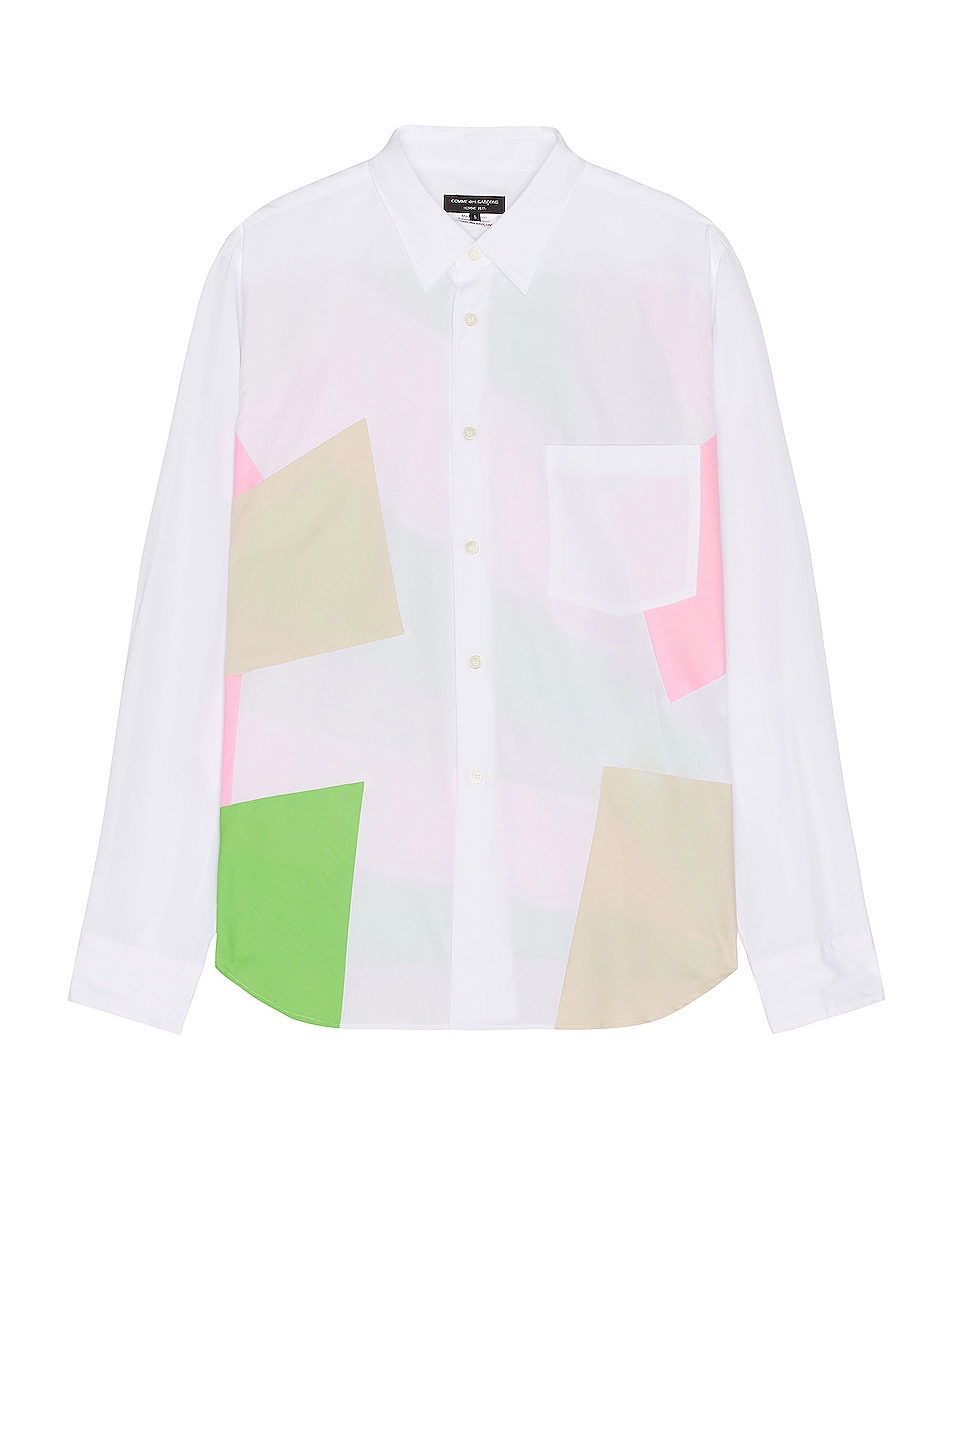 Image 1 of COMME des GARCONS Homme Plus Shirt in White